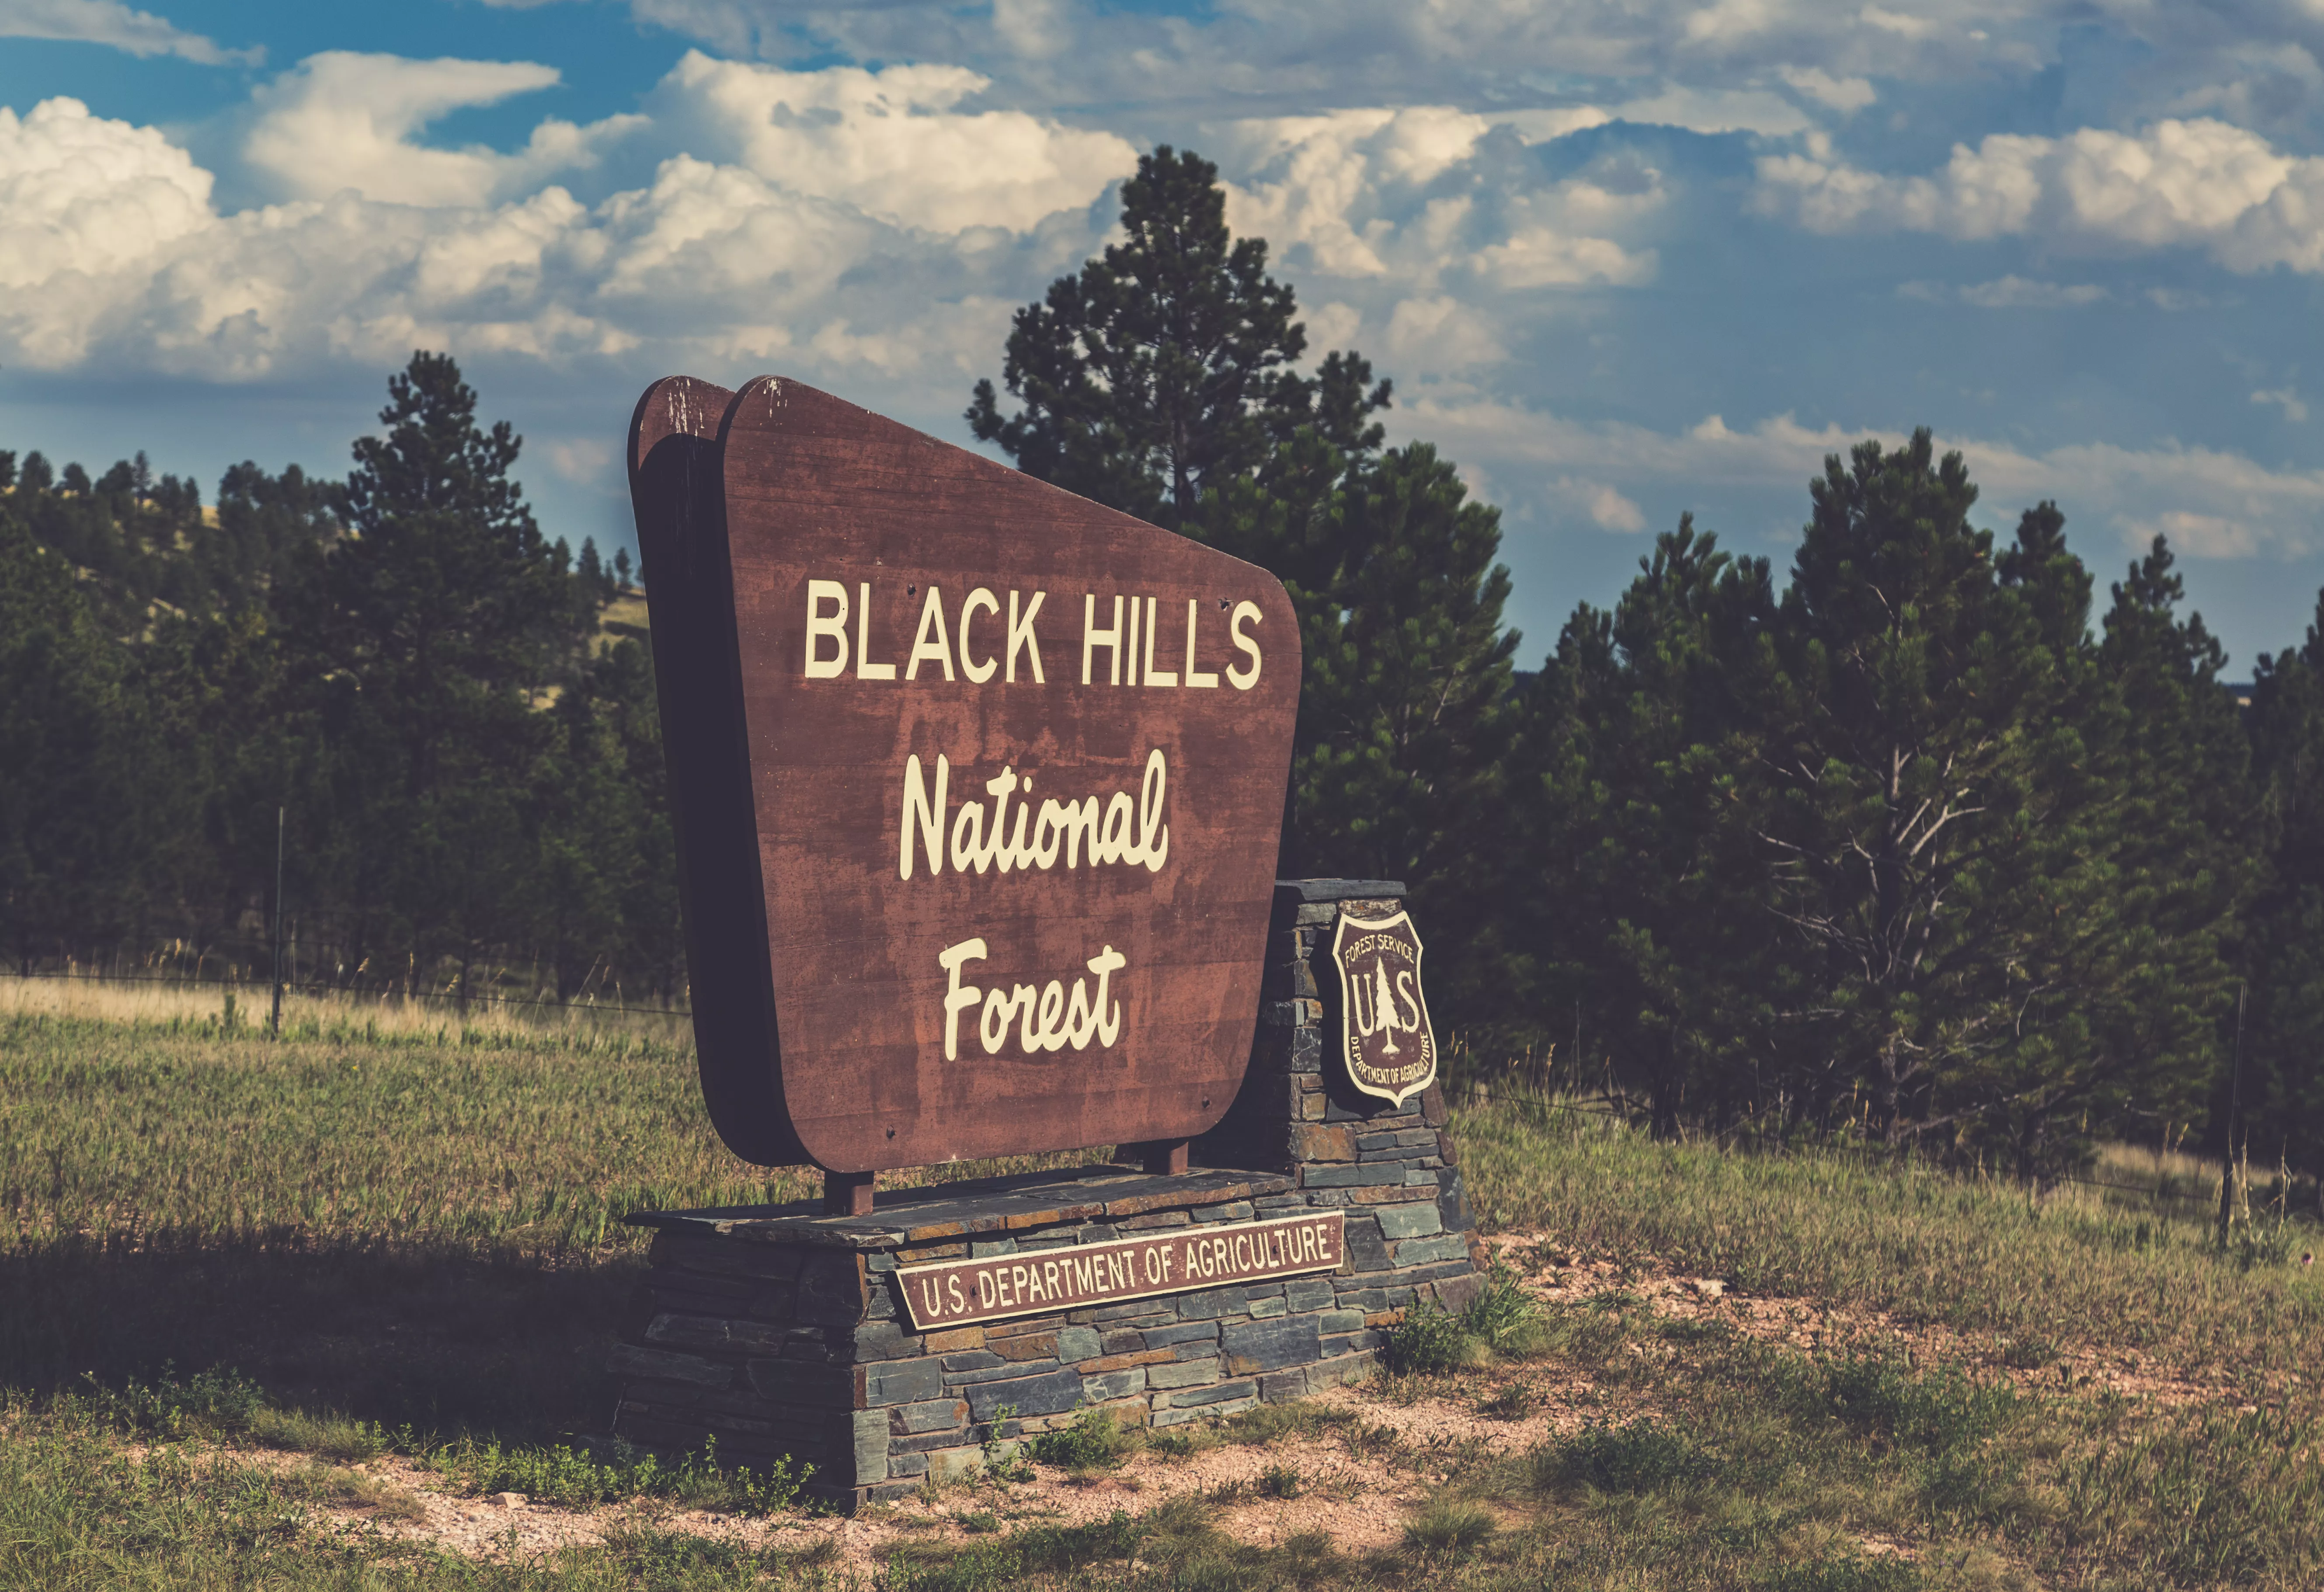 Black Hills National Forest in USA, North America | Nature Reserves,ATVs - Rated 0.9